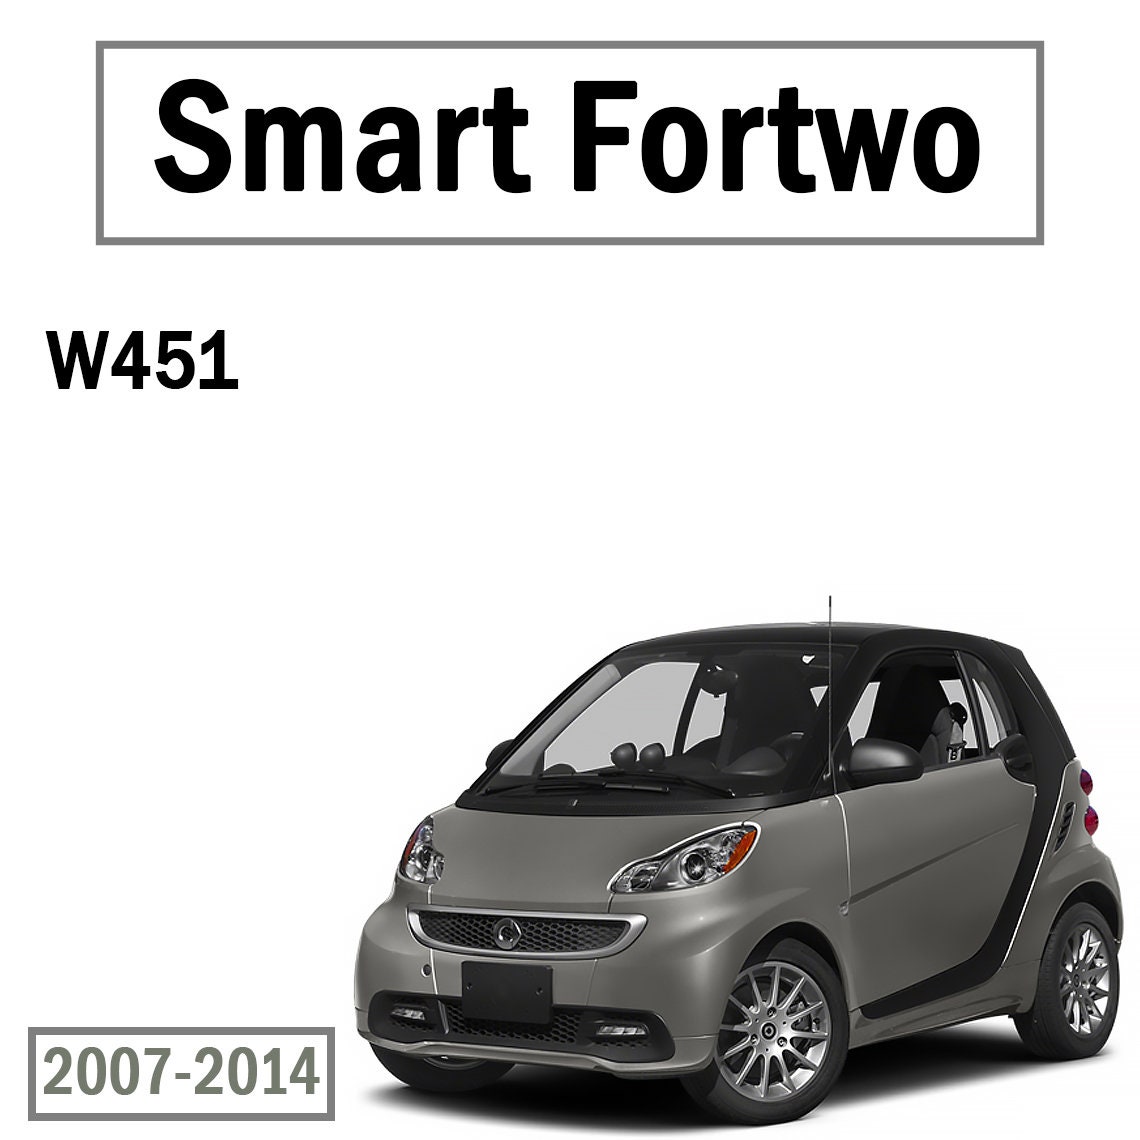 Smart Fortwo -  New Zealand